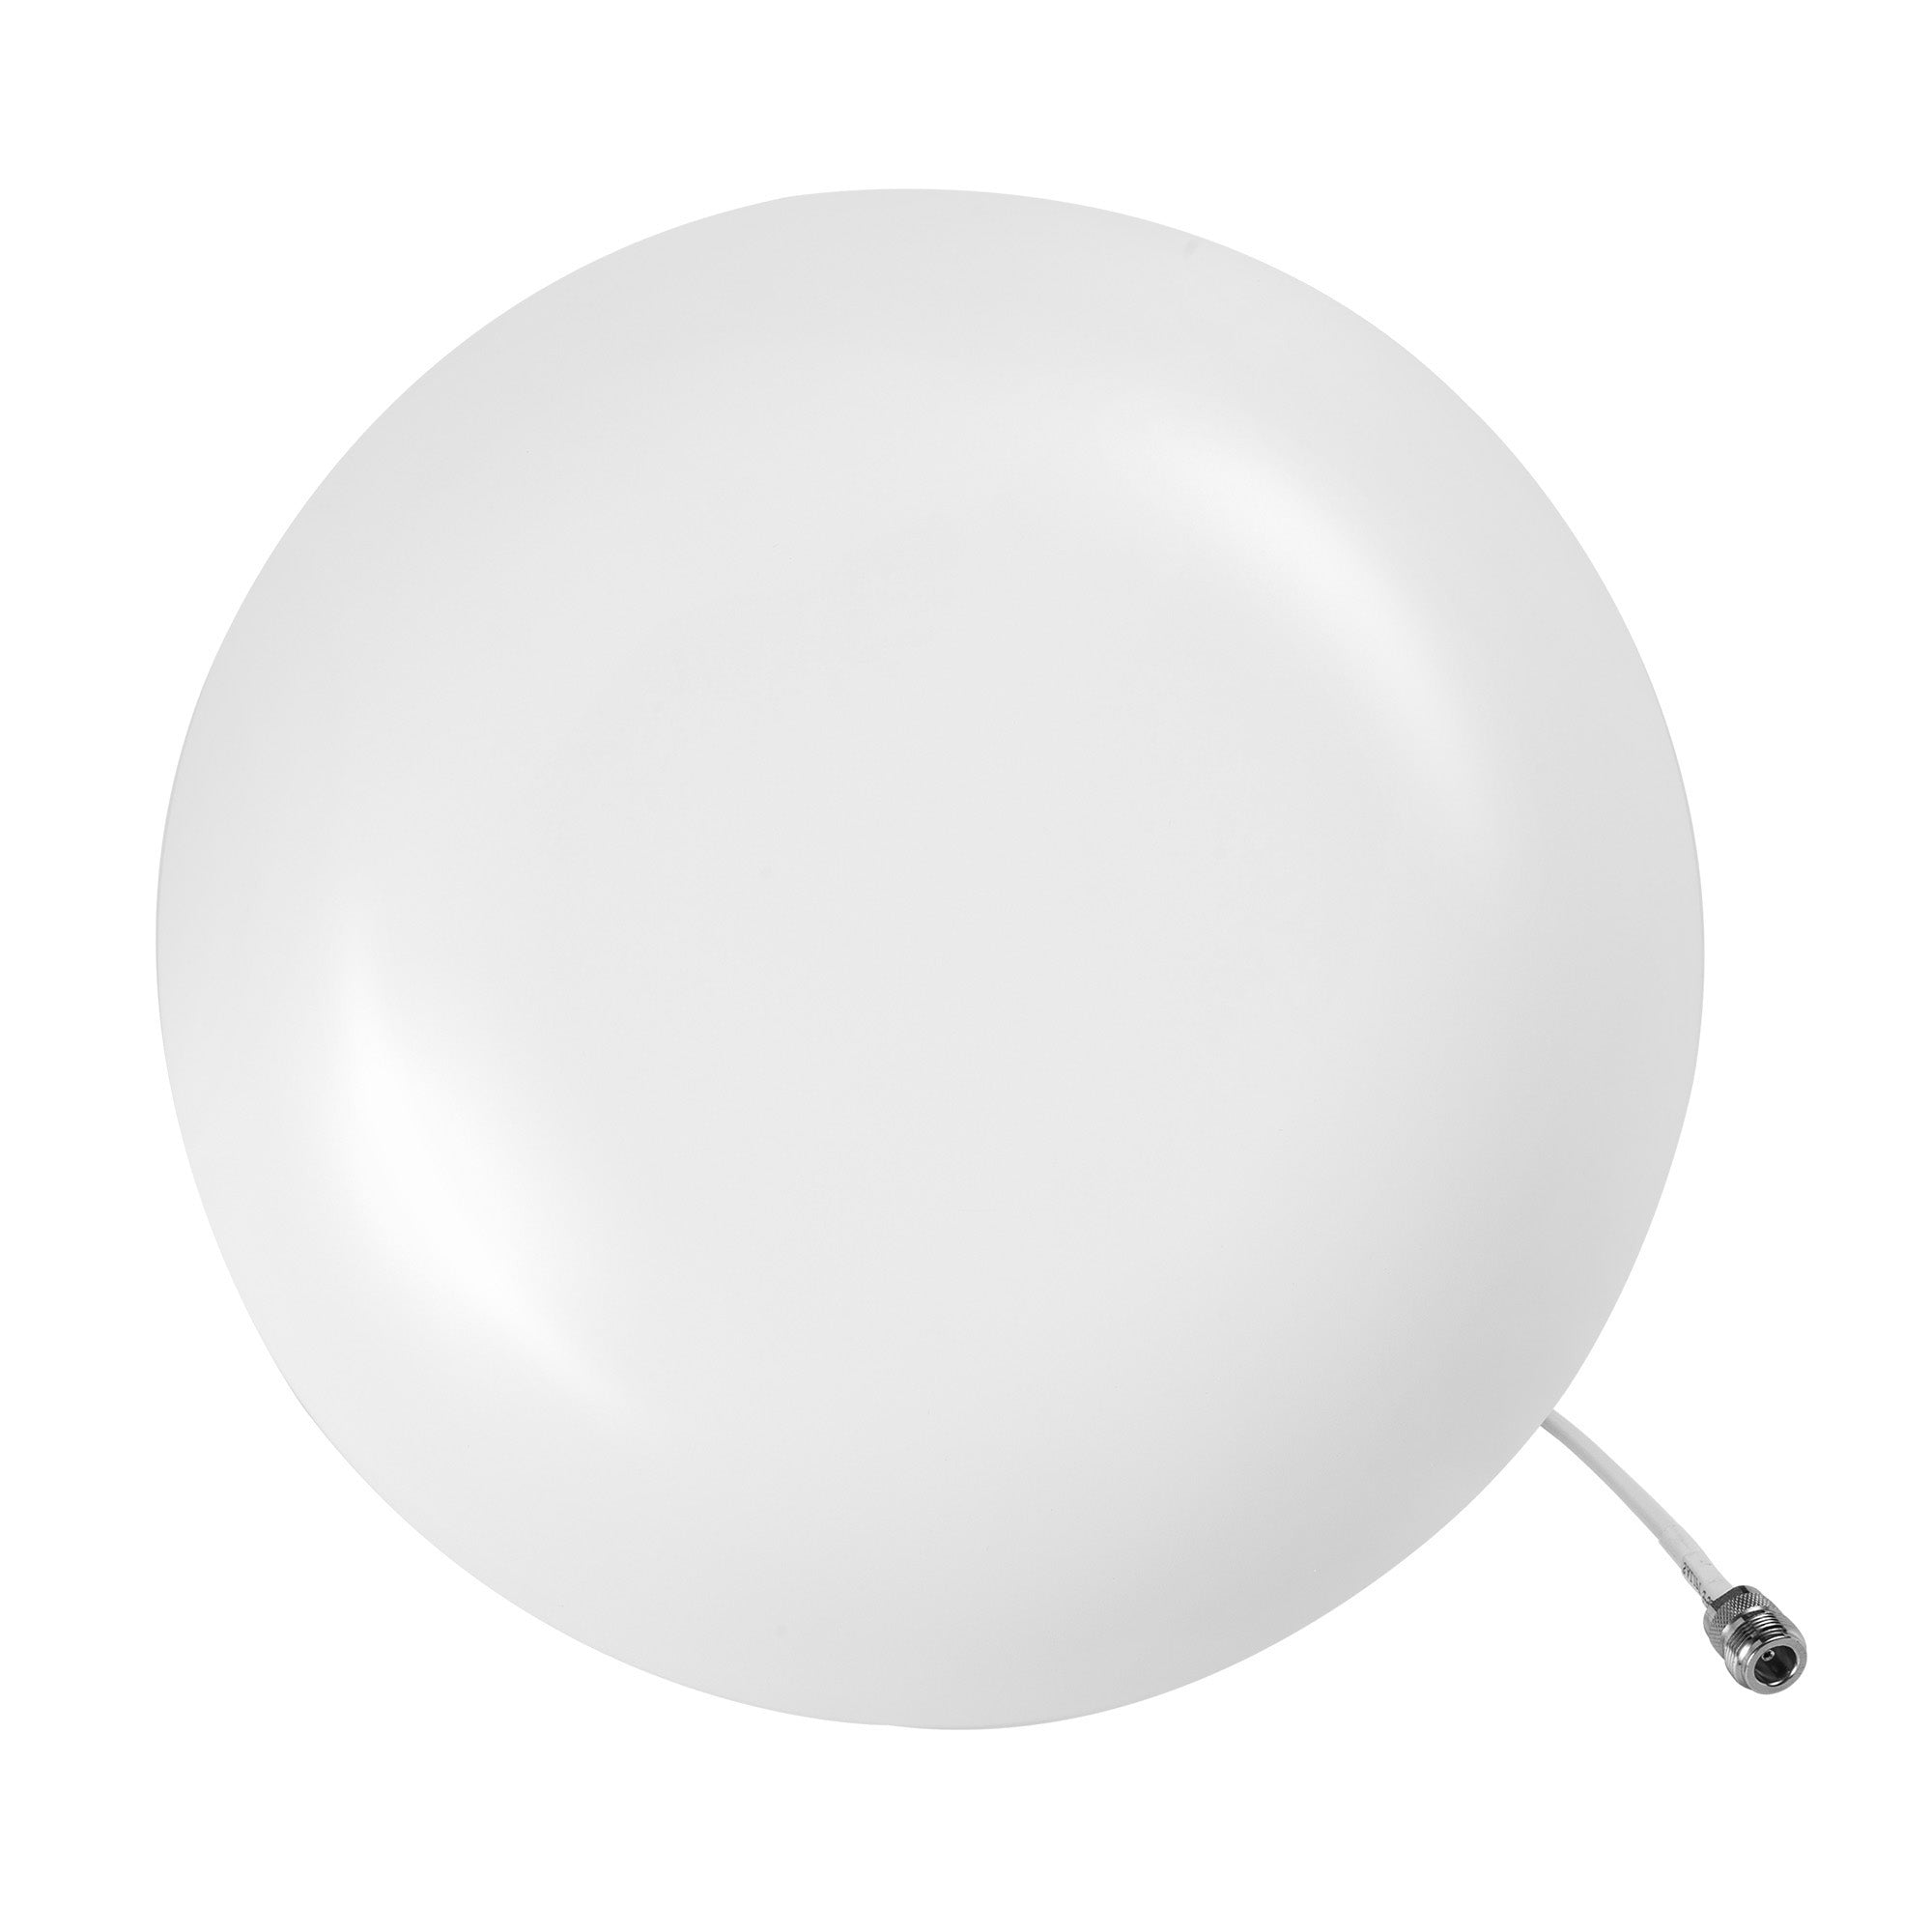 SureCall Ultra-Wideband Indoor Ultra-Thin Dome Antenna 3G, 4G,5G, 617-2700 MHz  - 50 Ohm - N-Female - 15-08585